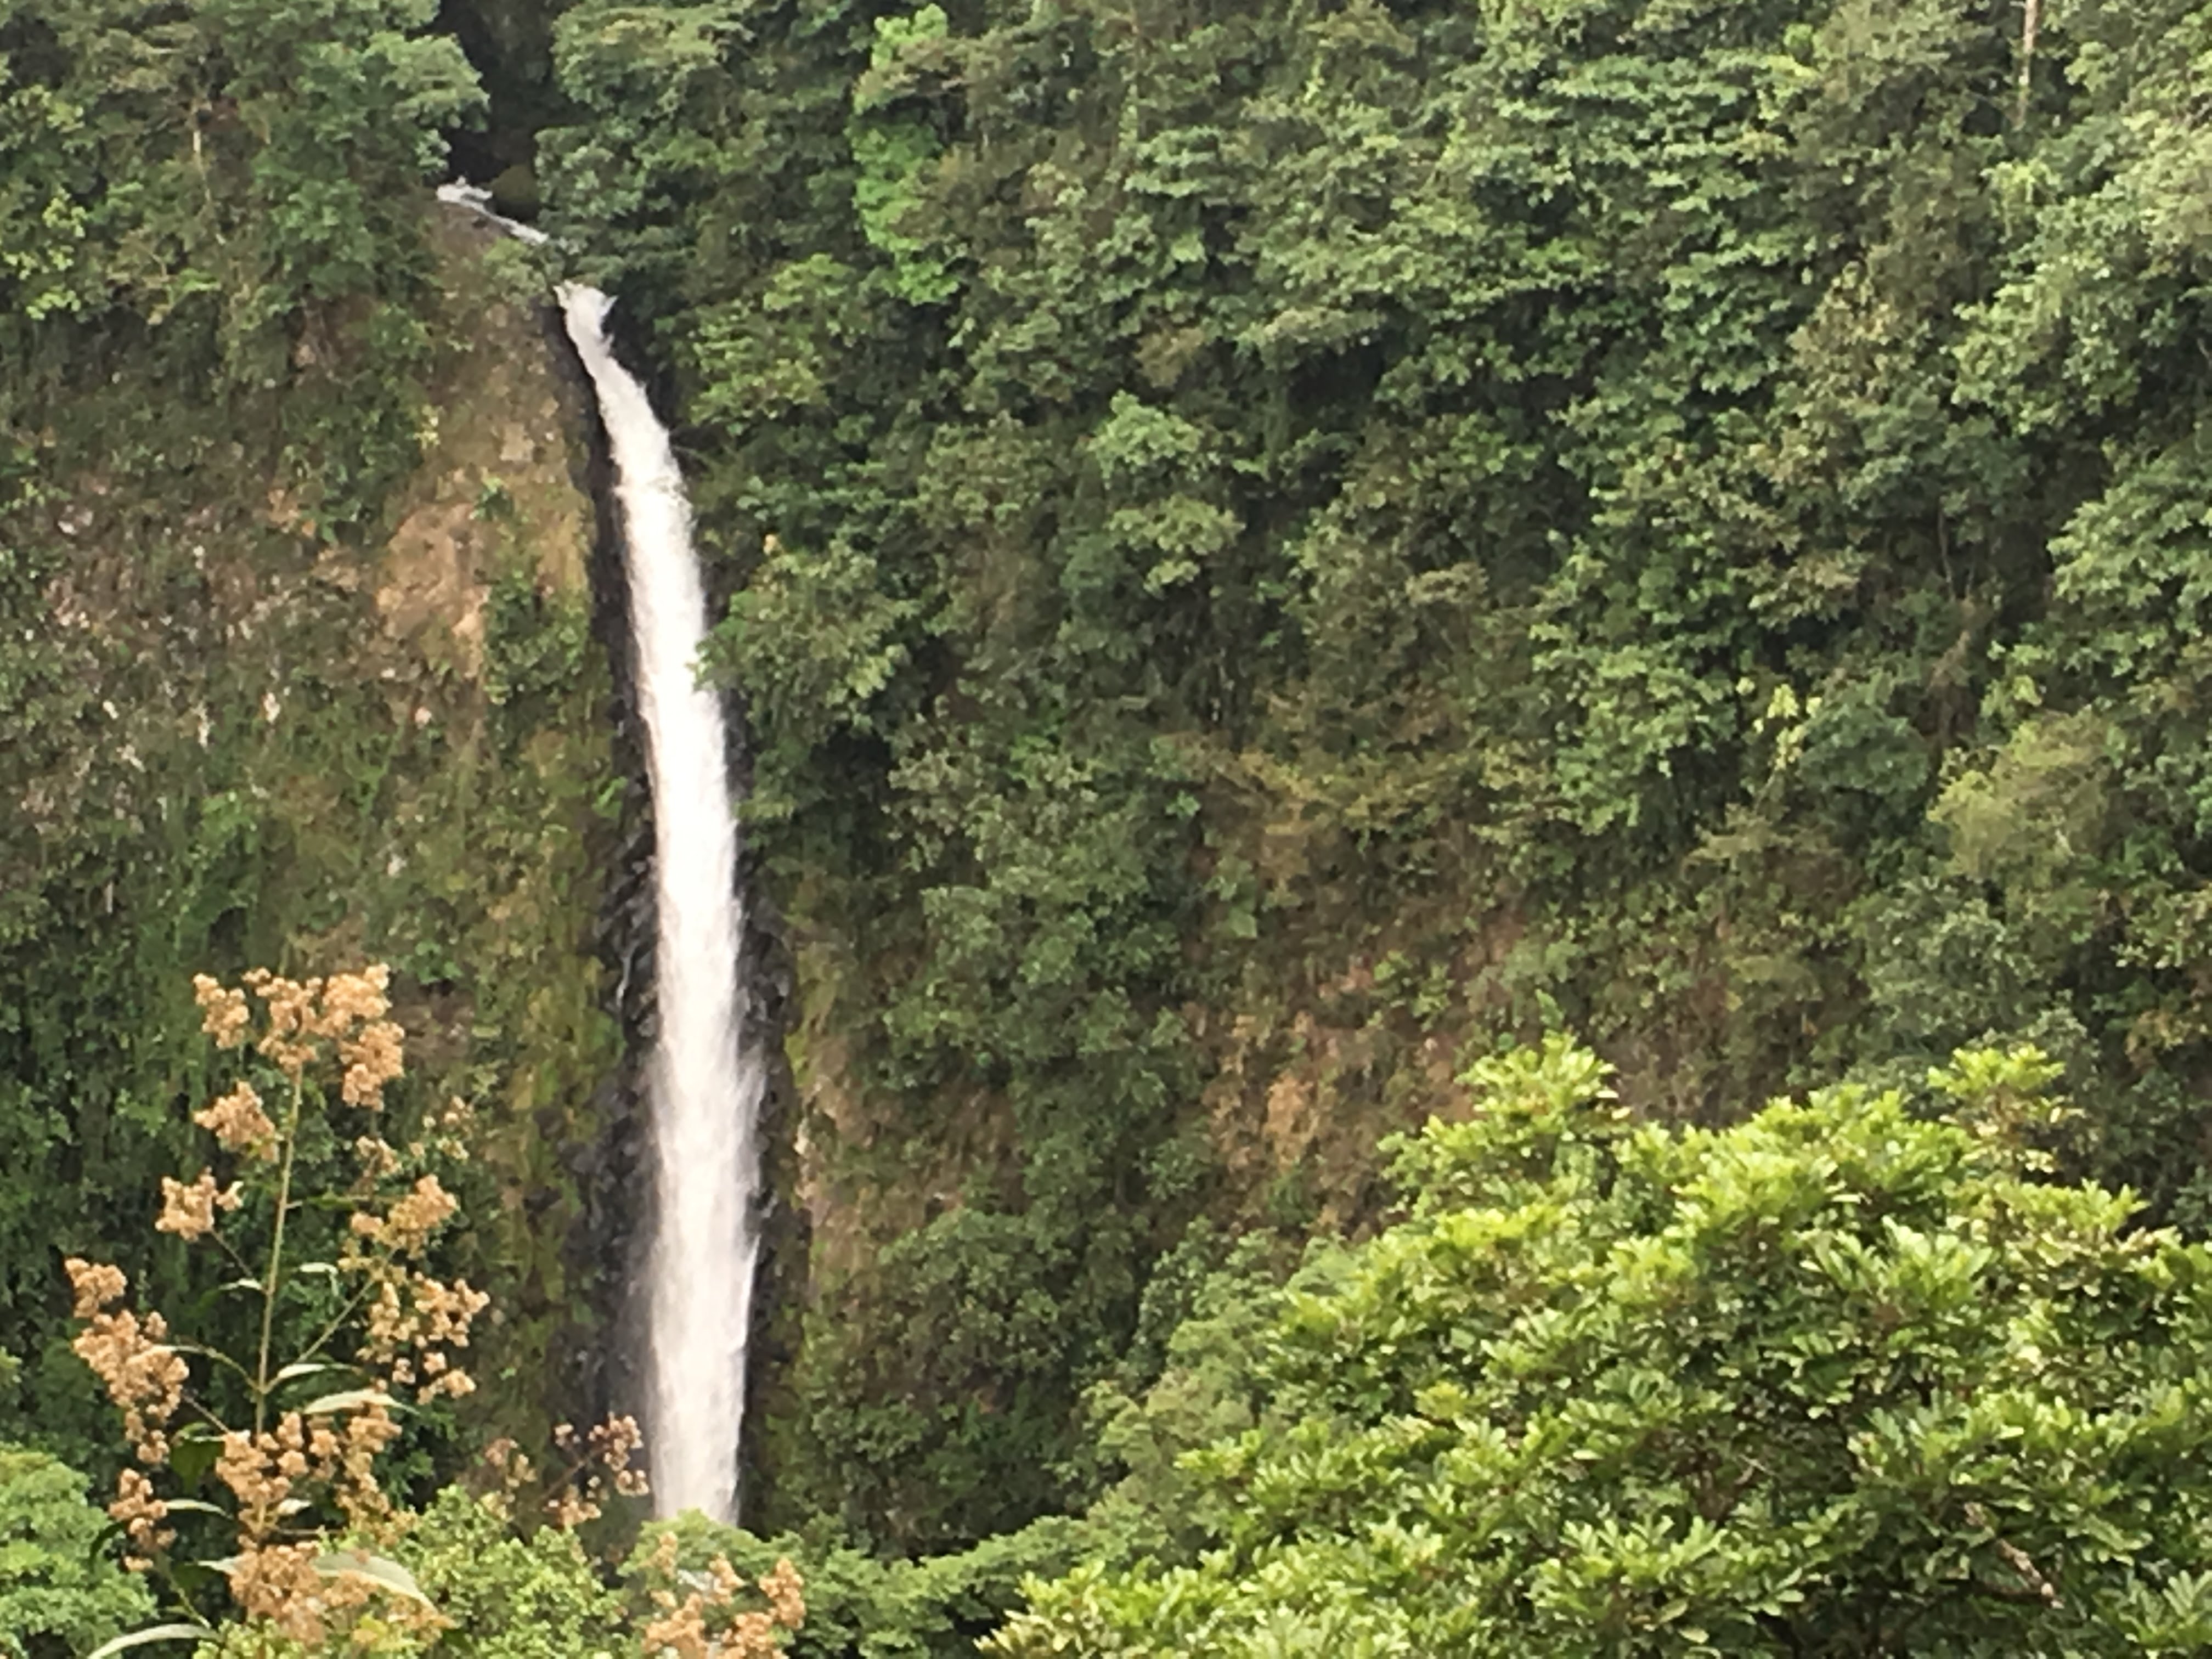 La Fortuna Waterfall, from a distance